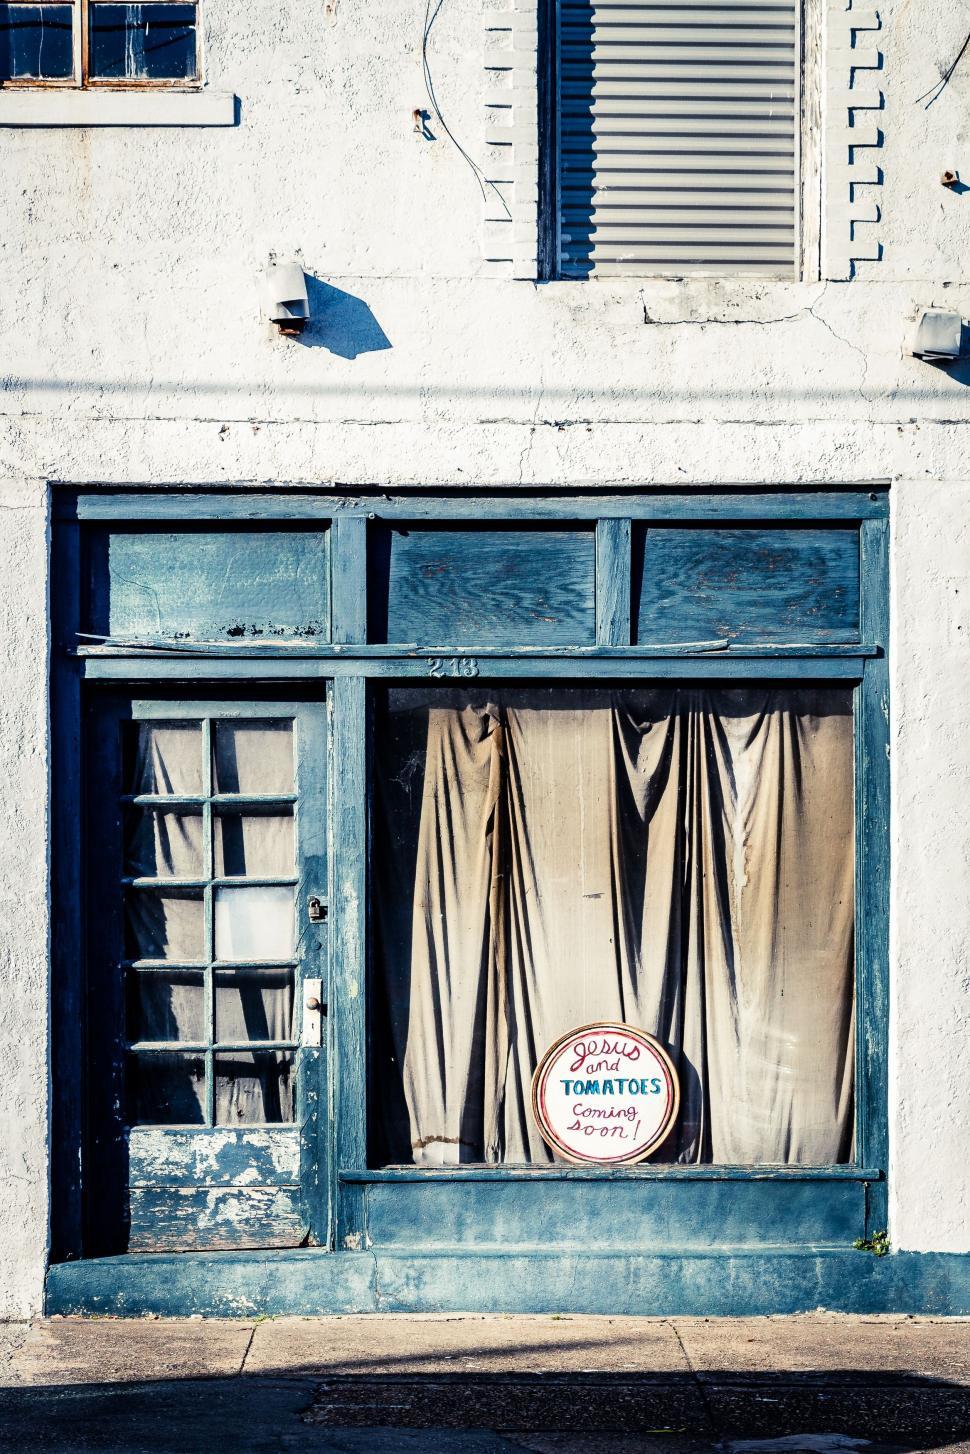 Free Image of Old Building With Open Door Sign 